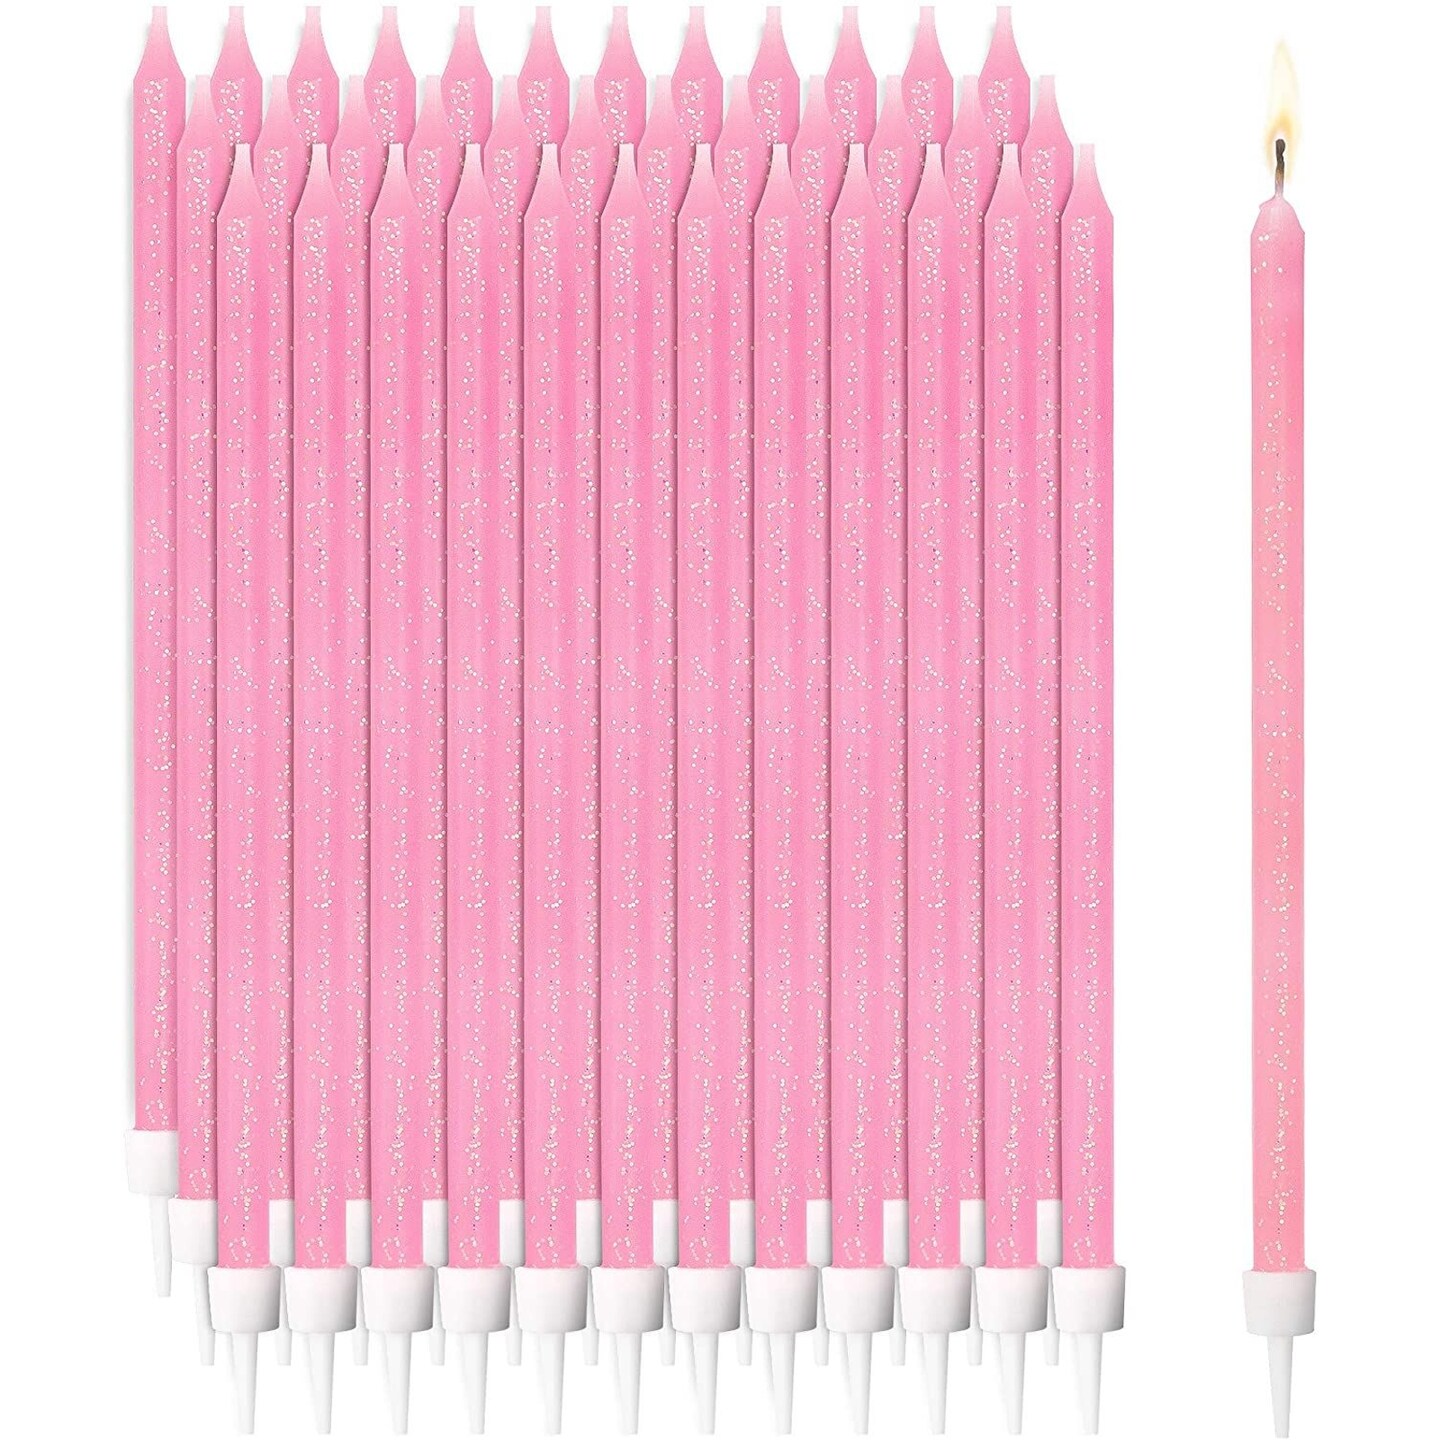 Pink Glitter Confetti Long Thin Birthday Cake Candles in Holders (5 in, 48 Pack)